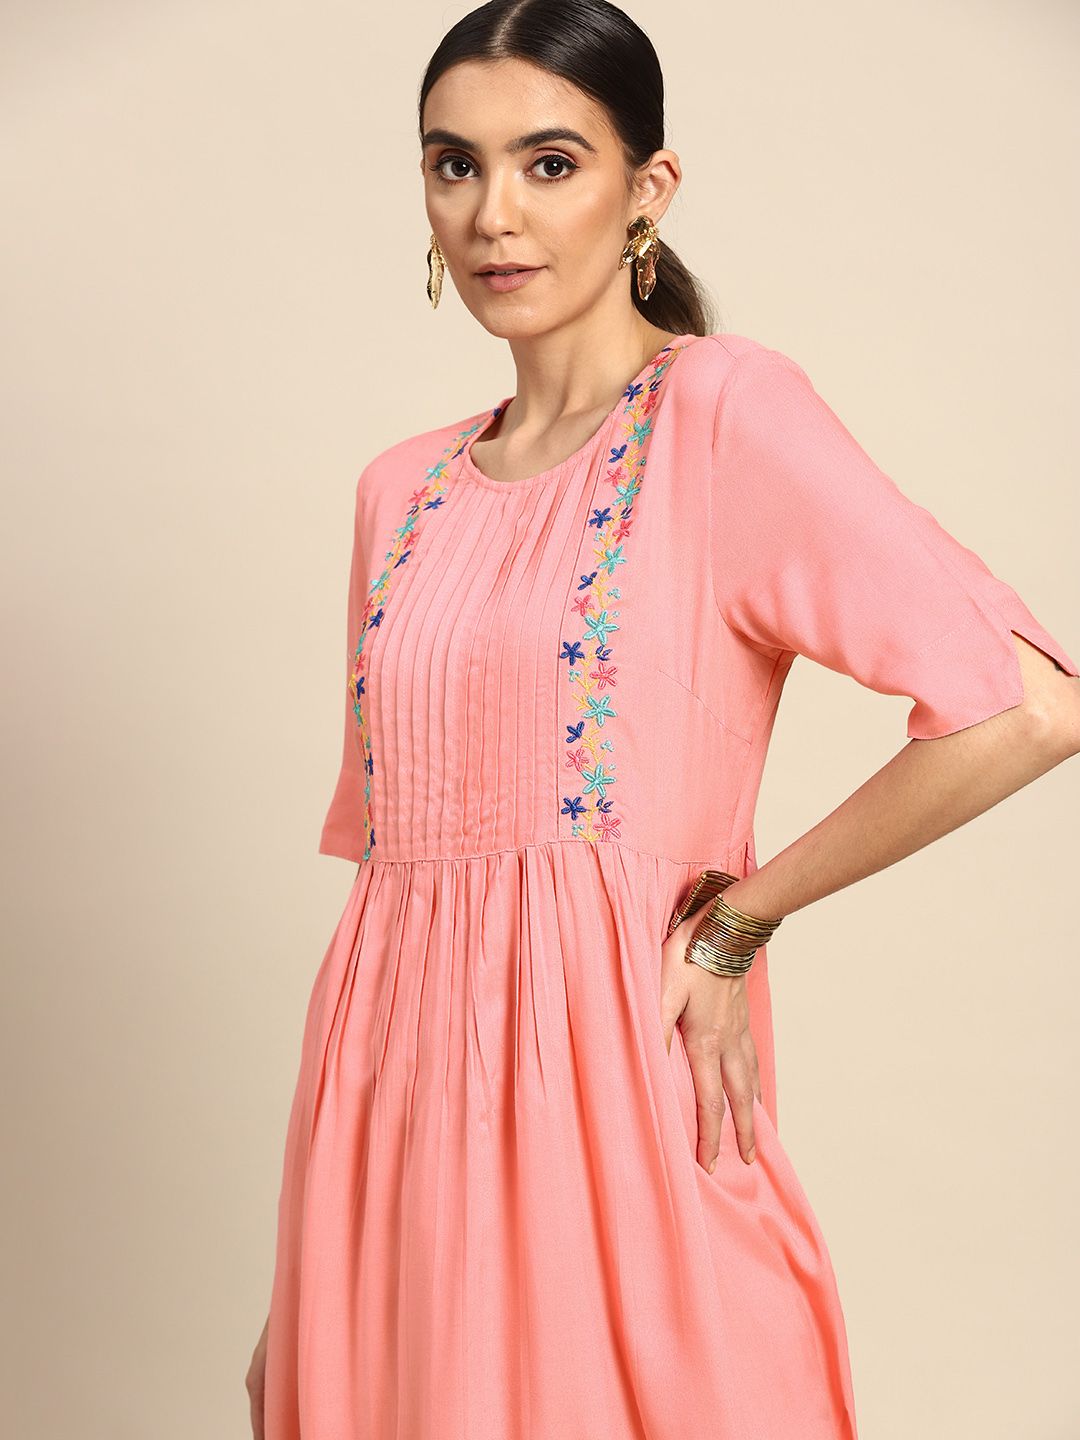 Anouk Pink Floral Embroidered A-Line Midi Dress Price in India